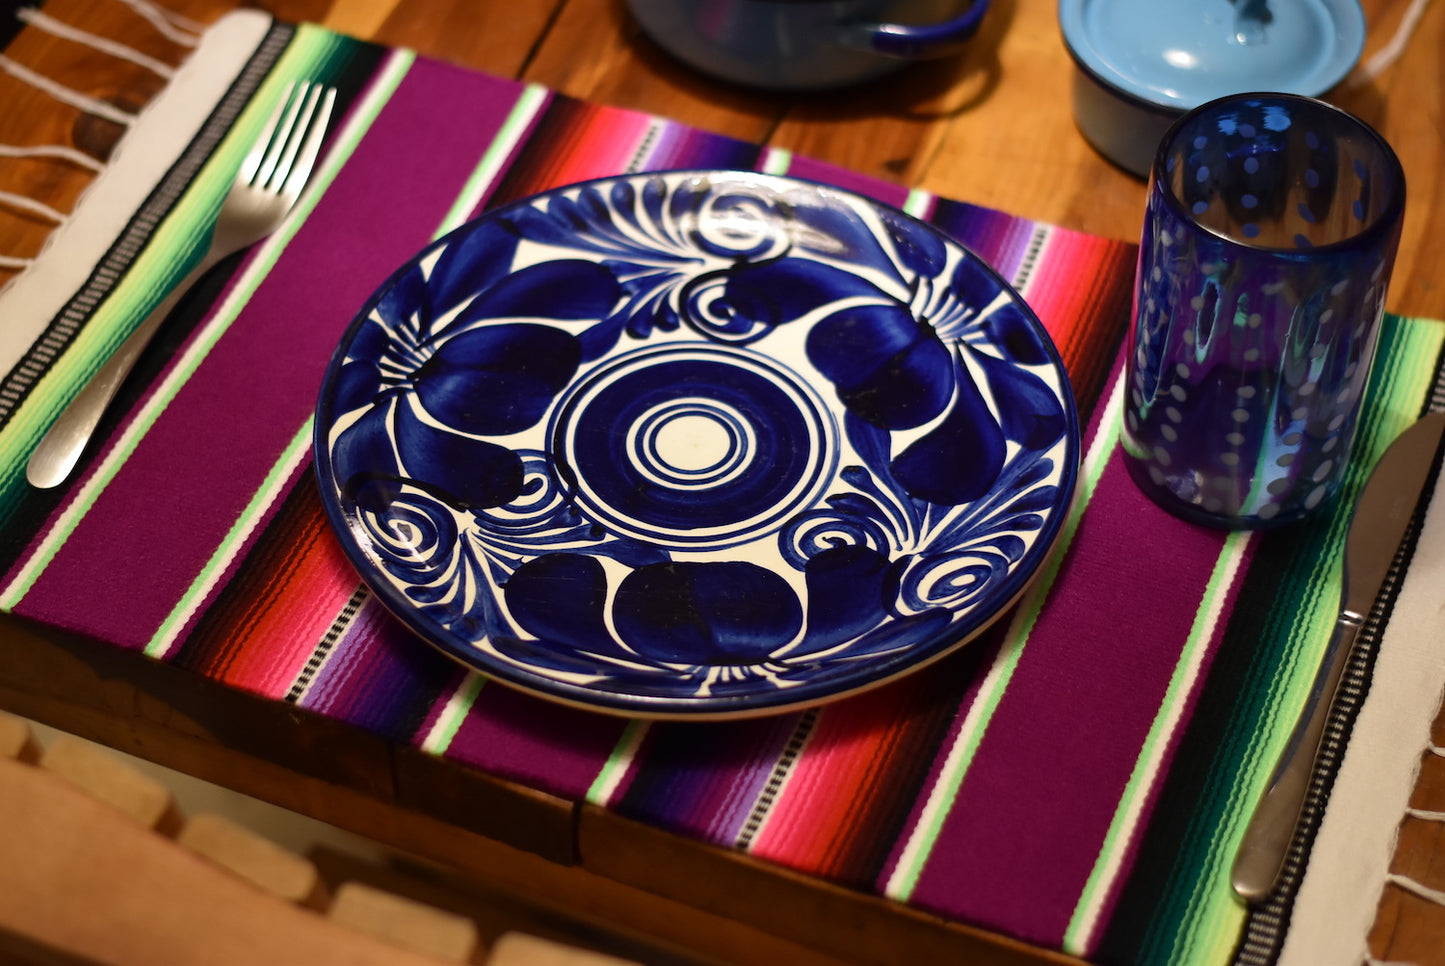 Mexican Placemats Set of 4 Serape Placemats Handwoven w Base Colours Yellow, Purple, Fuchsia, Dark Turquoise - ARTMEXICO